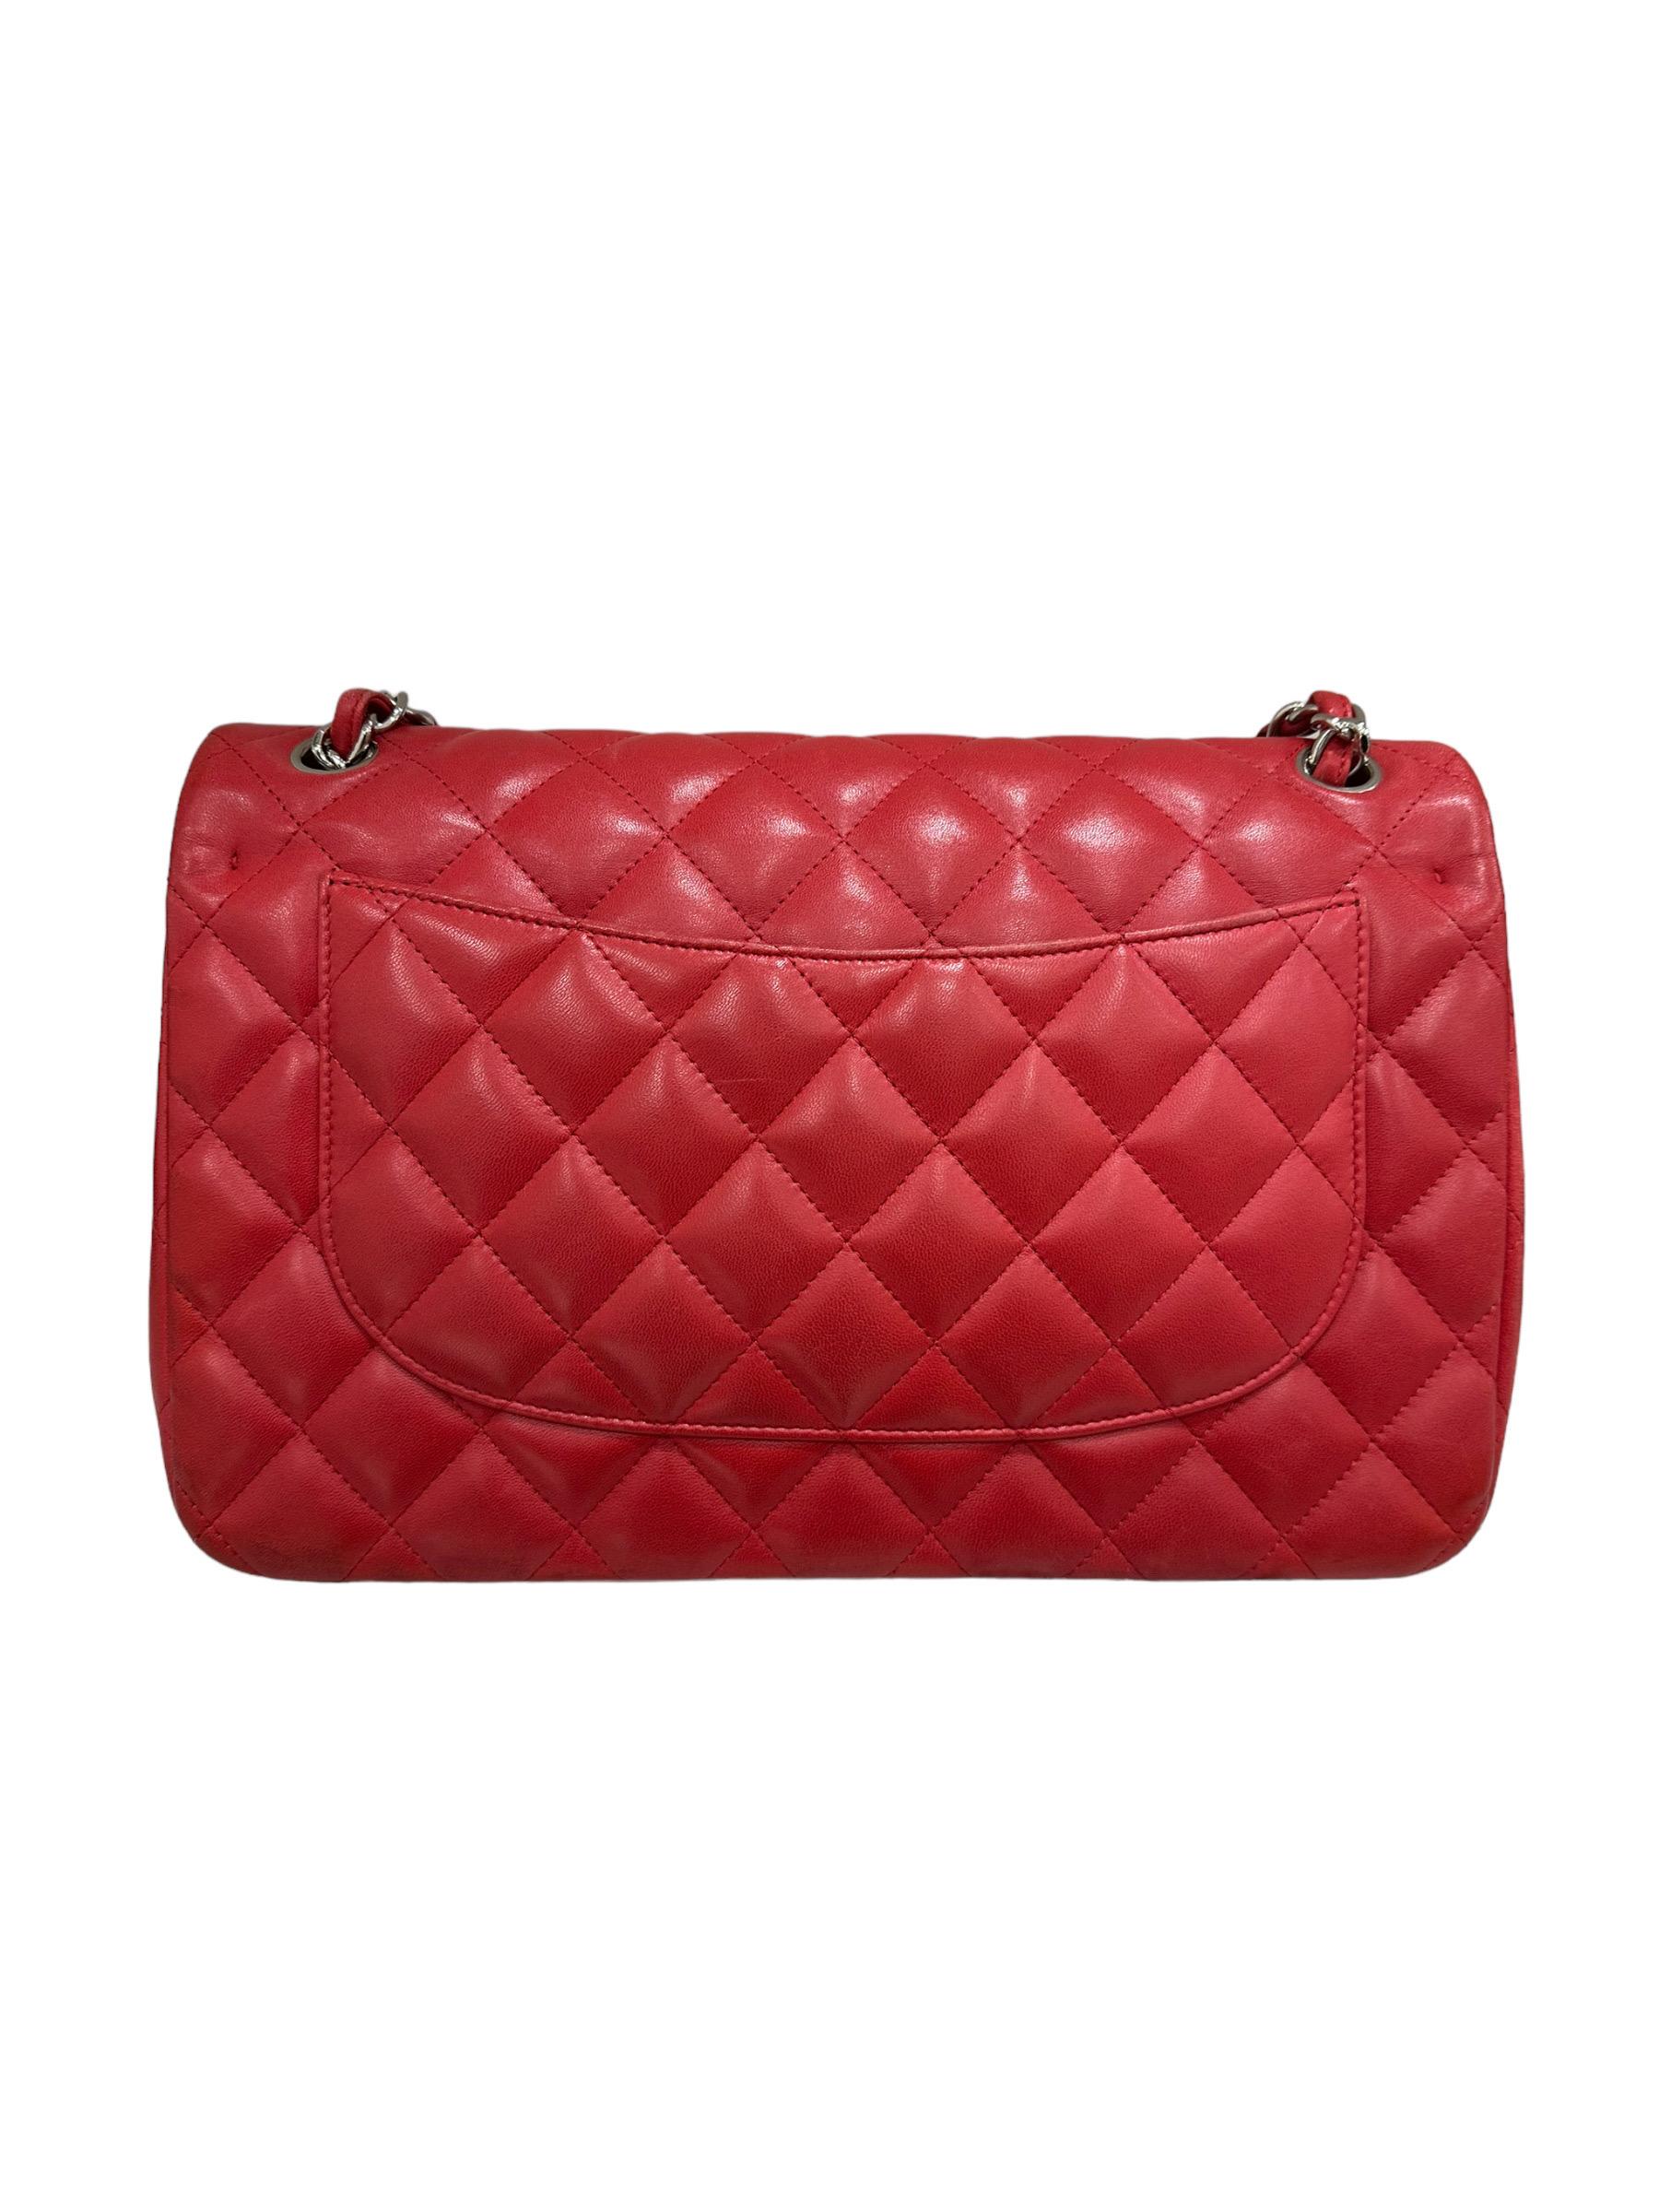 Borsa A Tracolla Chanel Timeless Jumbo Rossa 2013/2014 im Zustand „Hervorragend“ im Angebot in Torre Del Greco, IT